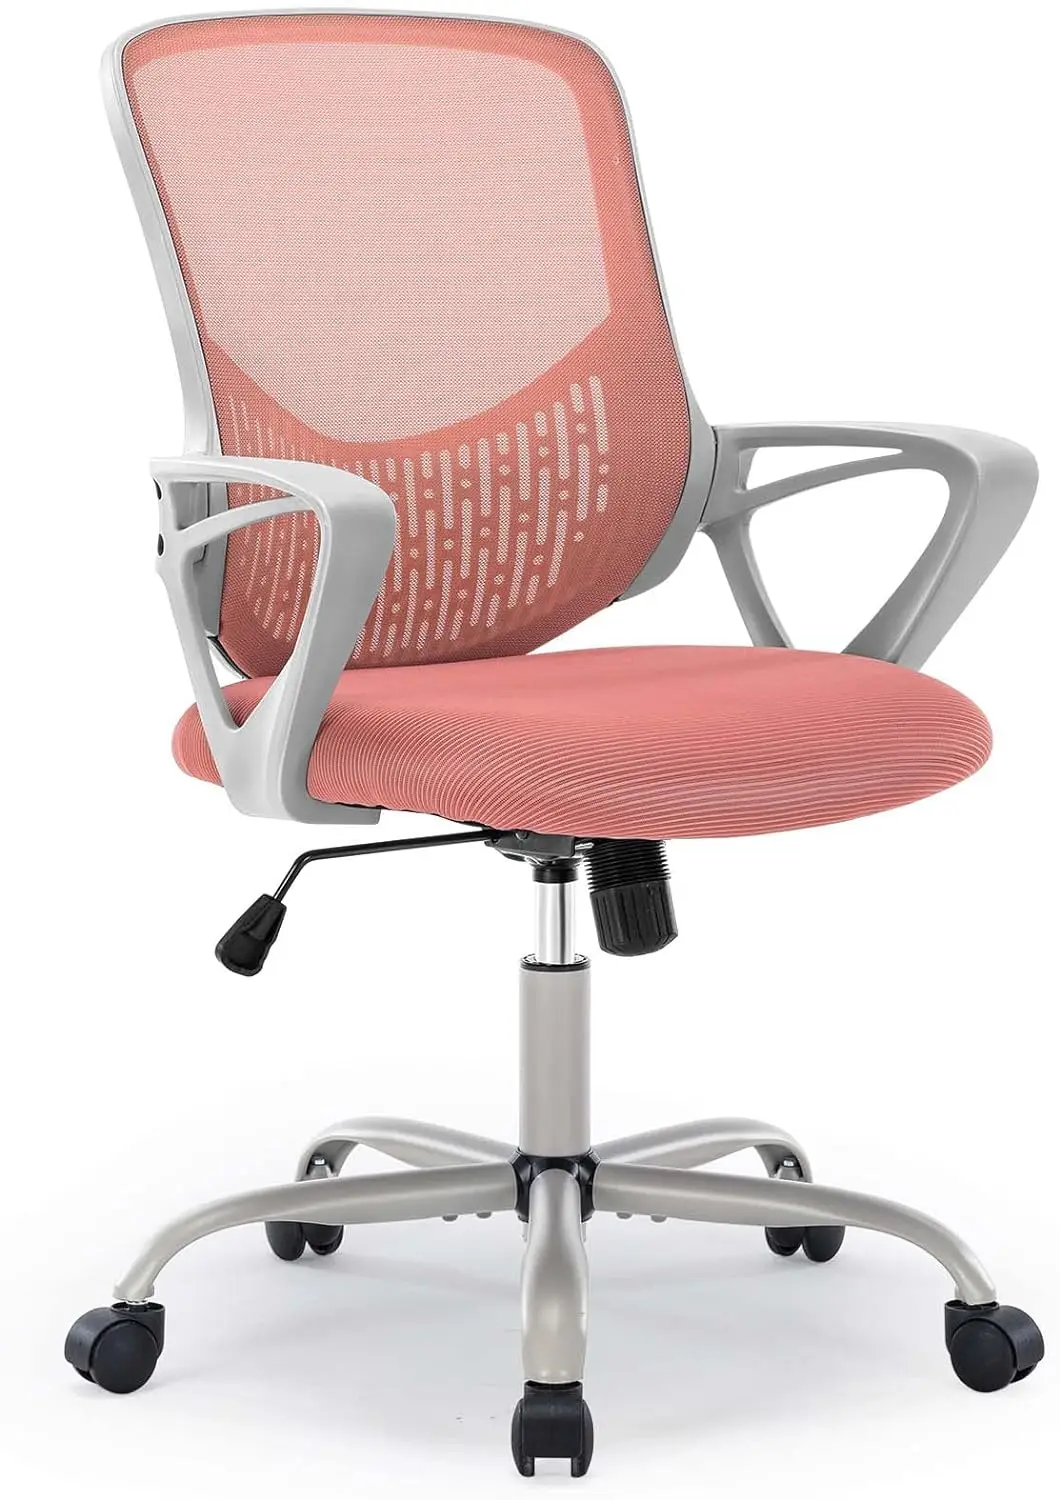 Office Home Desk Mesh Fixed Armrest, Executive Computer Chair with Soft Foam Seat Cushion and Lumbar Support